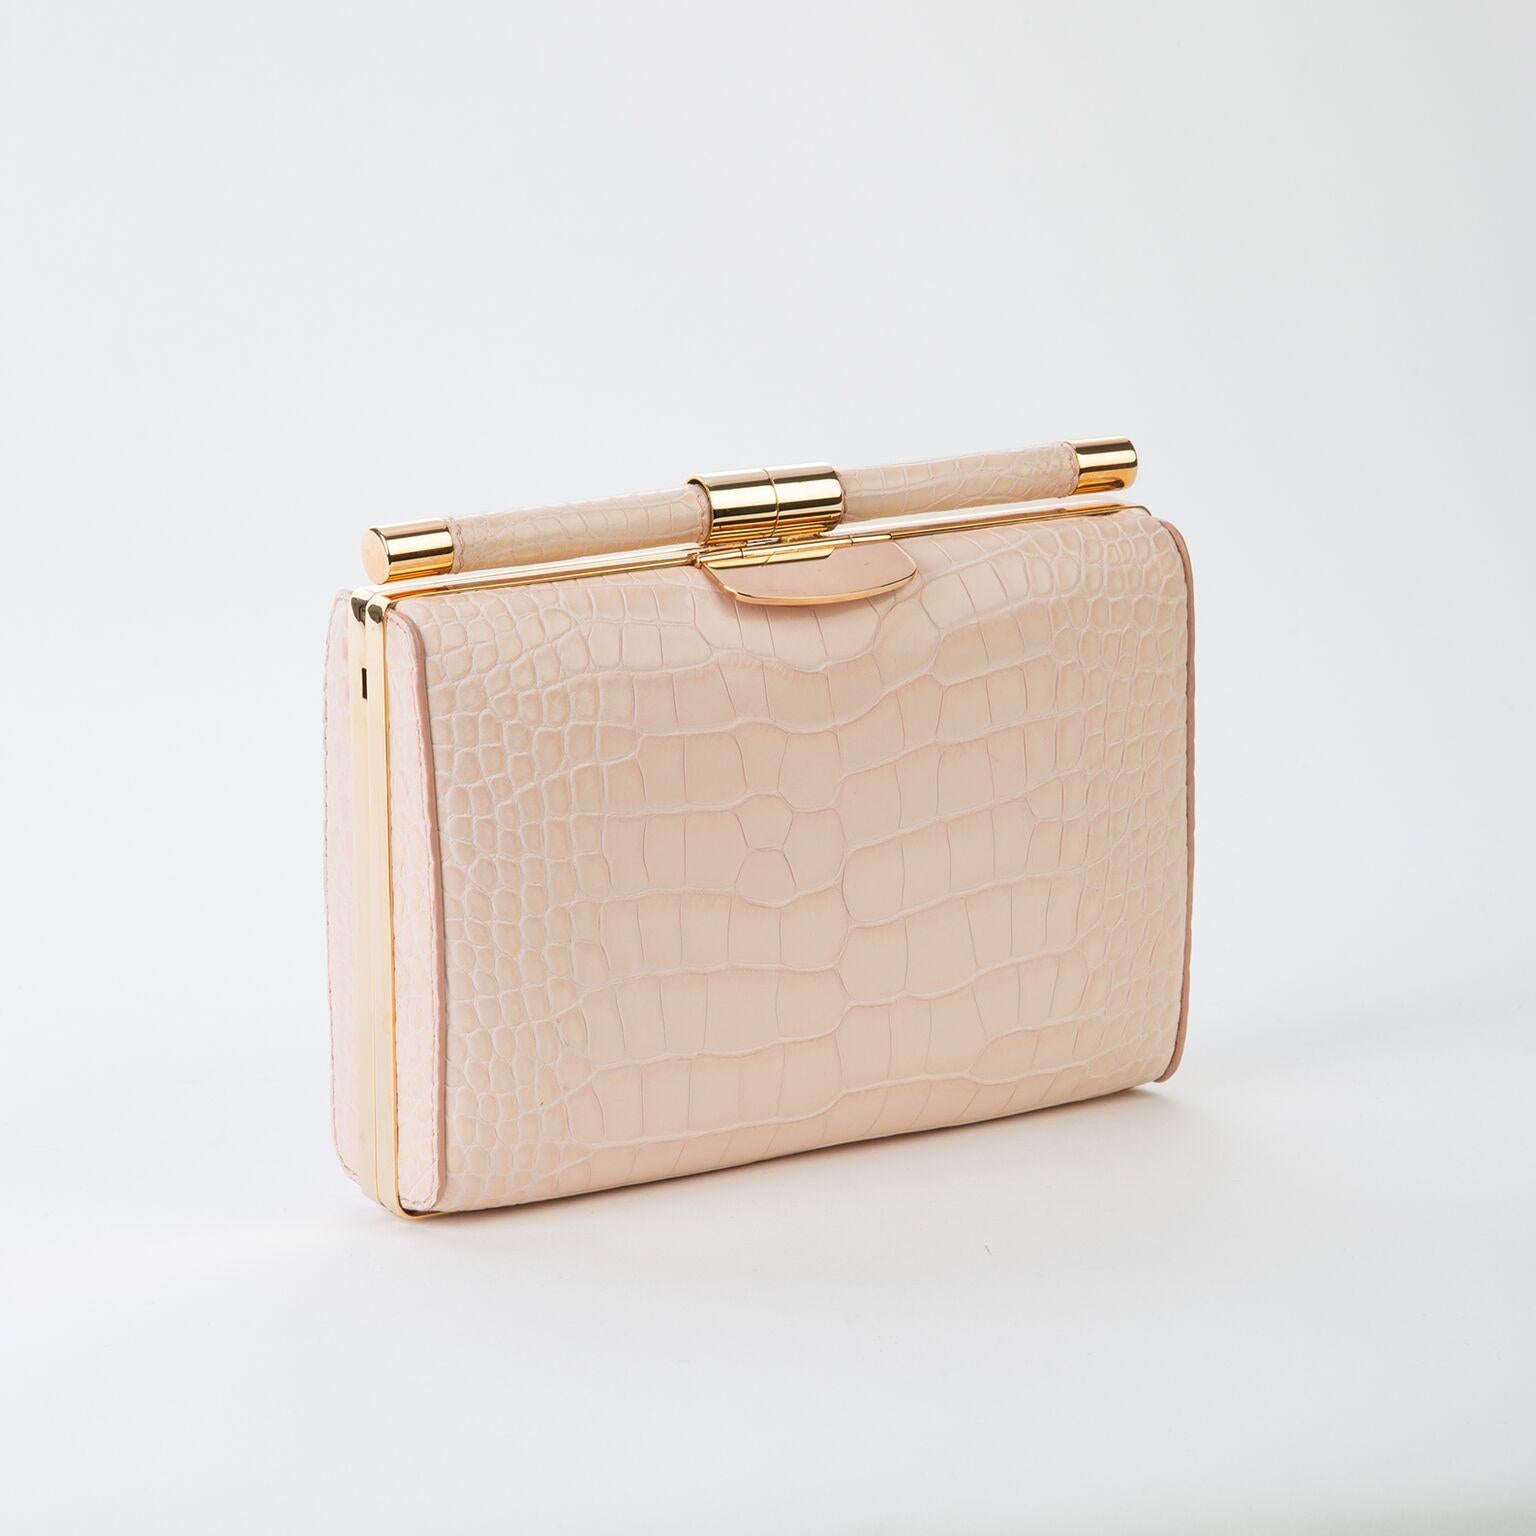 The Jamie Clutch is a structured square clutch with an optional cross-body chain and interior pocket. It features our slide-lock closure and signature Thayer blue satin lining. 

Size: Small
Hardware: Rose Gold
Interior/Lining: Satin
Dimensions: